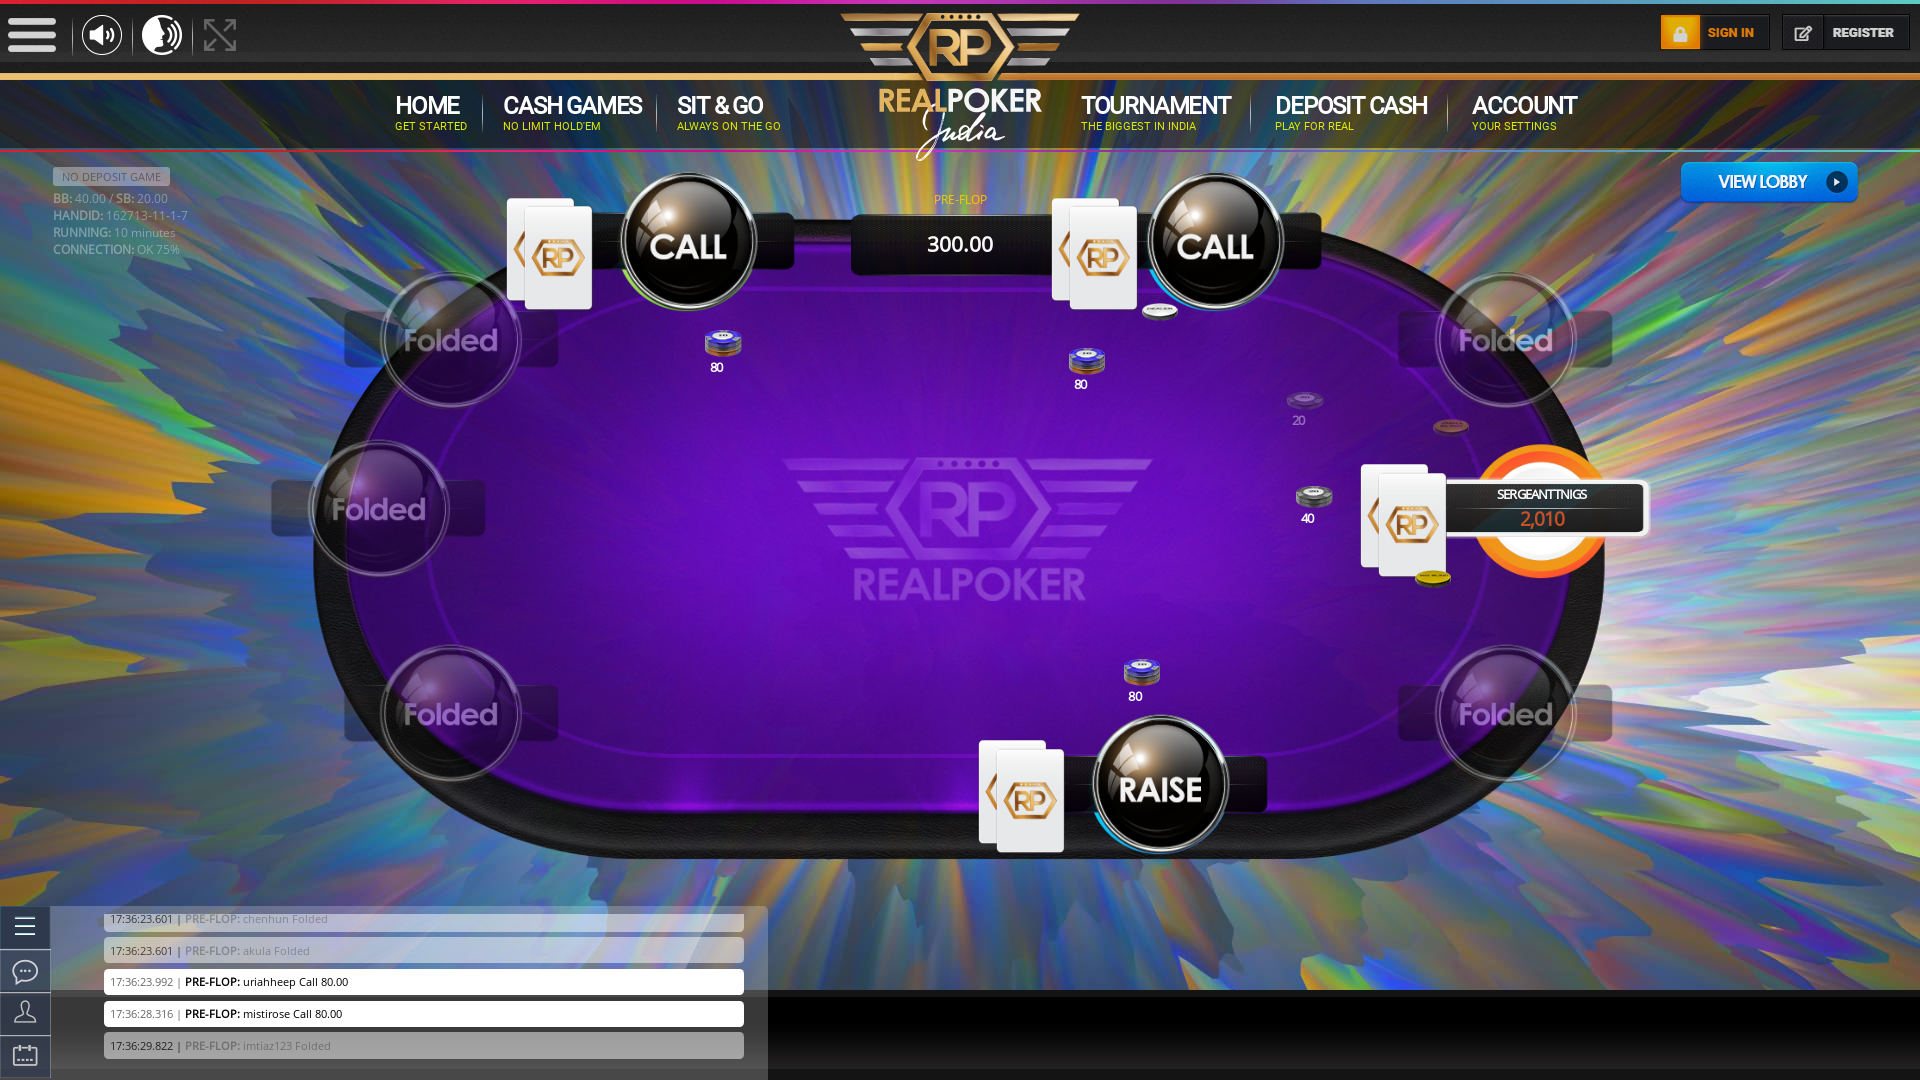 Real Indian poker on a 10 player table in the 10th minute of the game